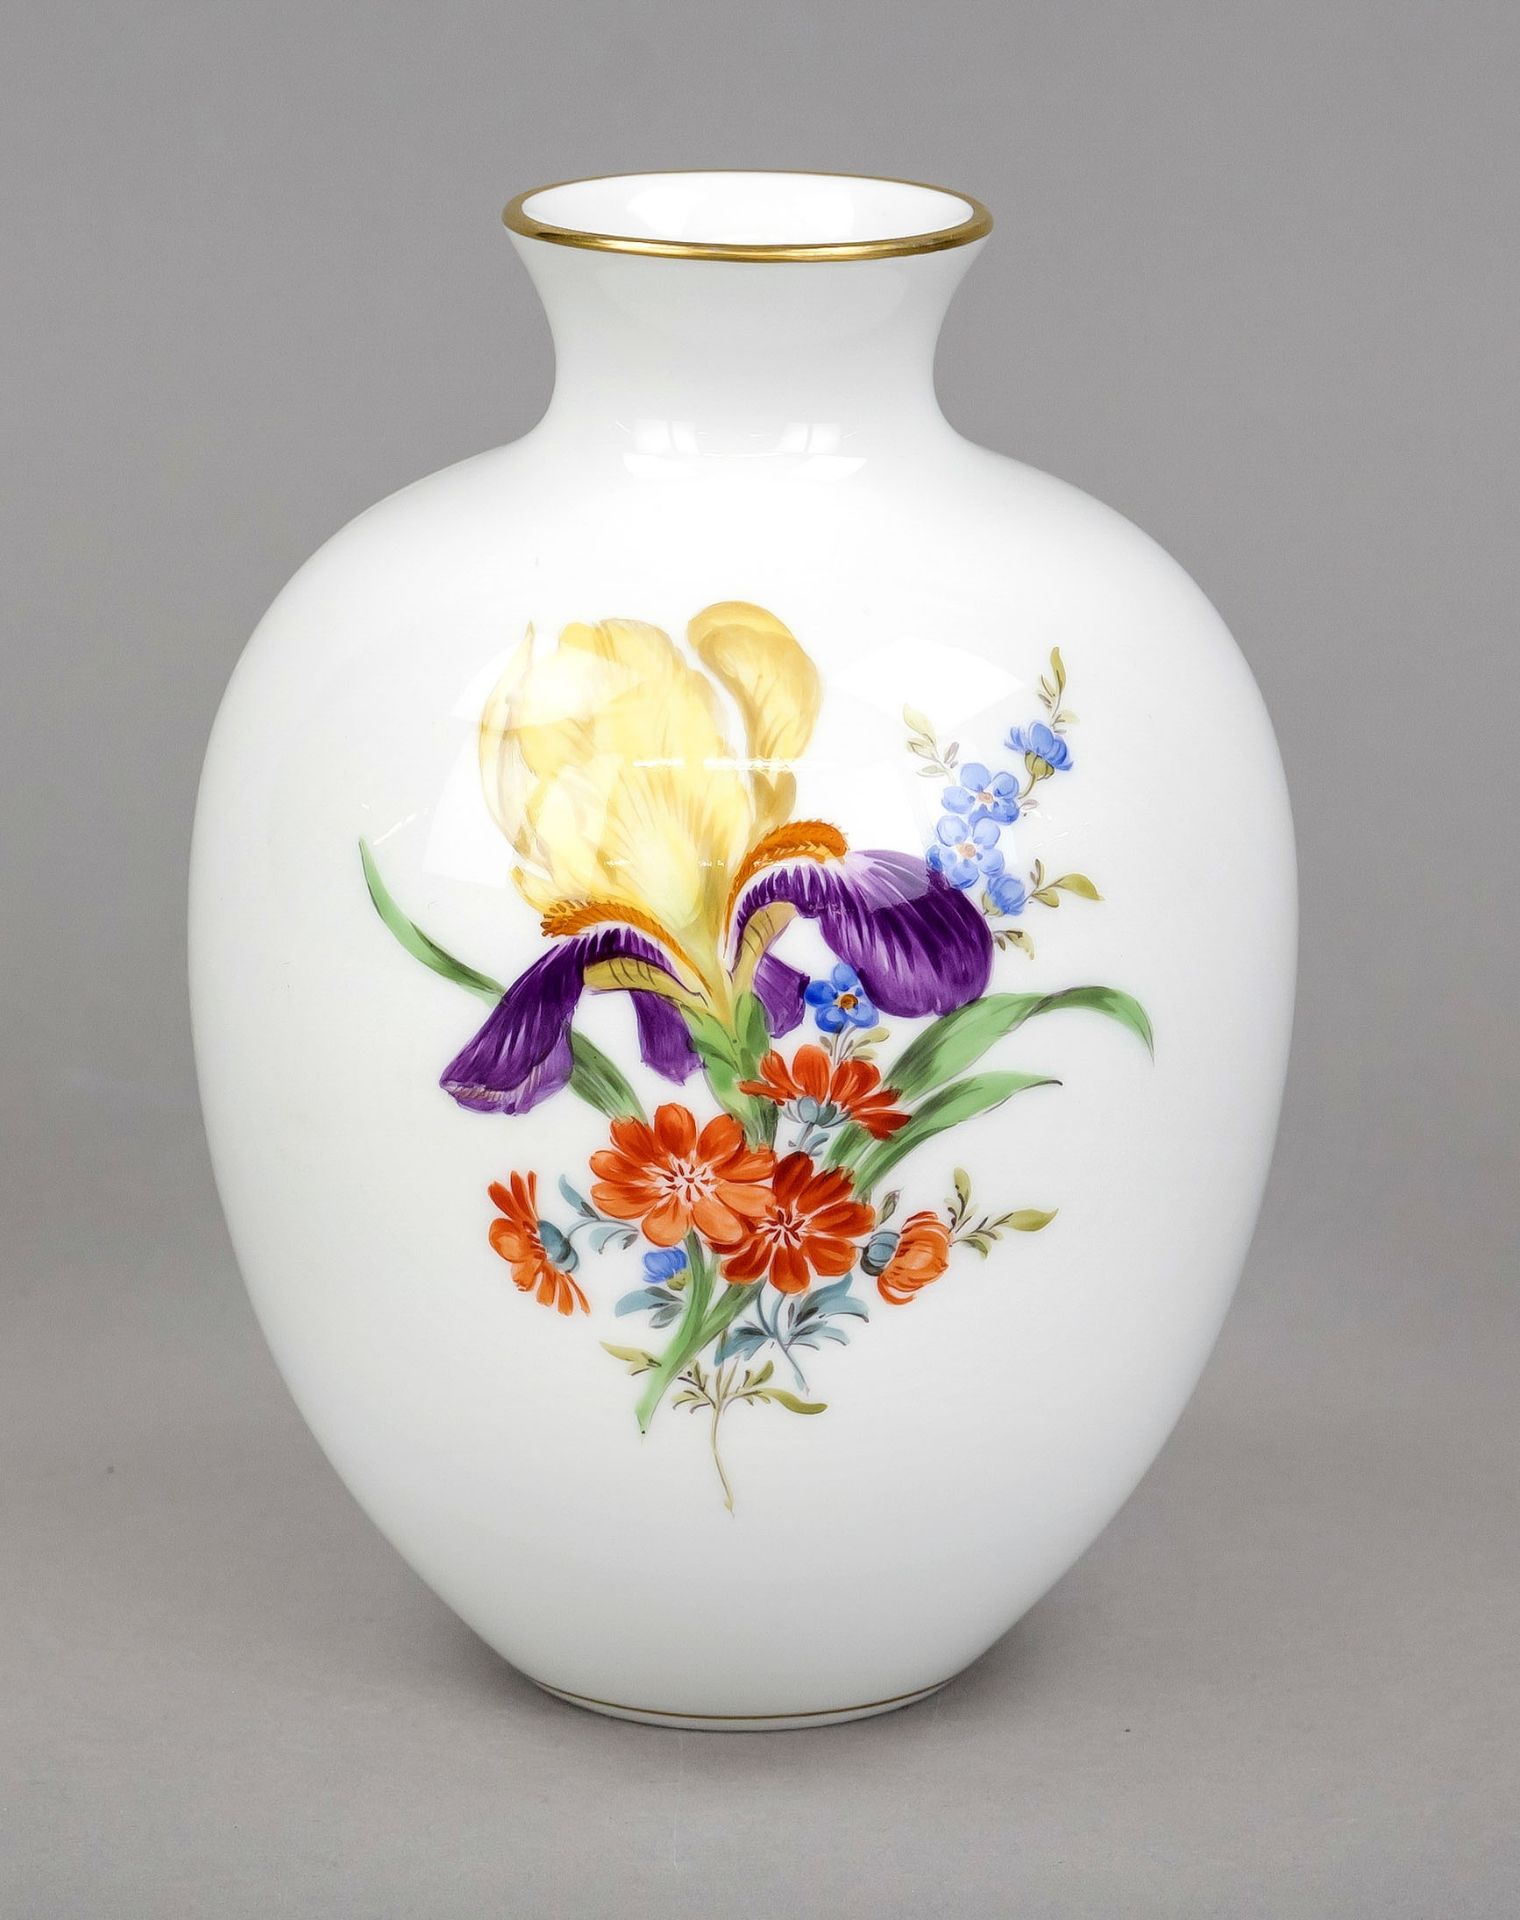 Vase, Meissen, mark after 1934, 1st choice, ovoid form, polychrome flower painting, gold rim, h.